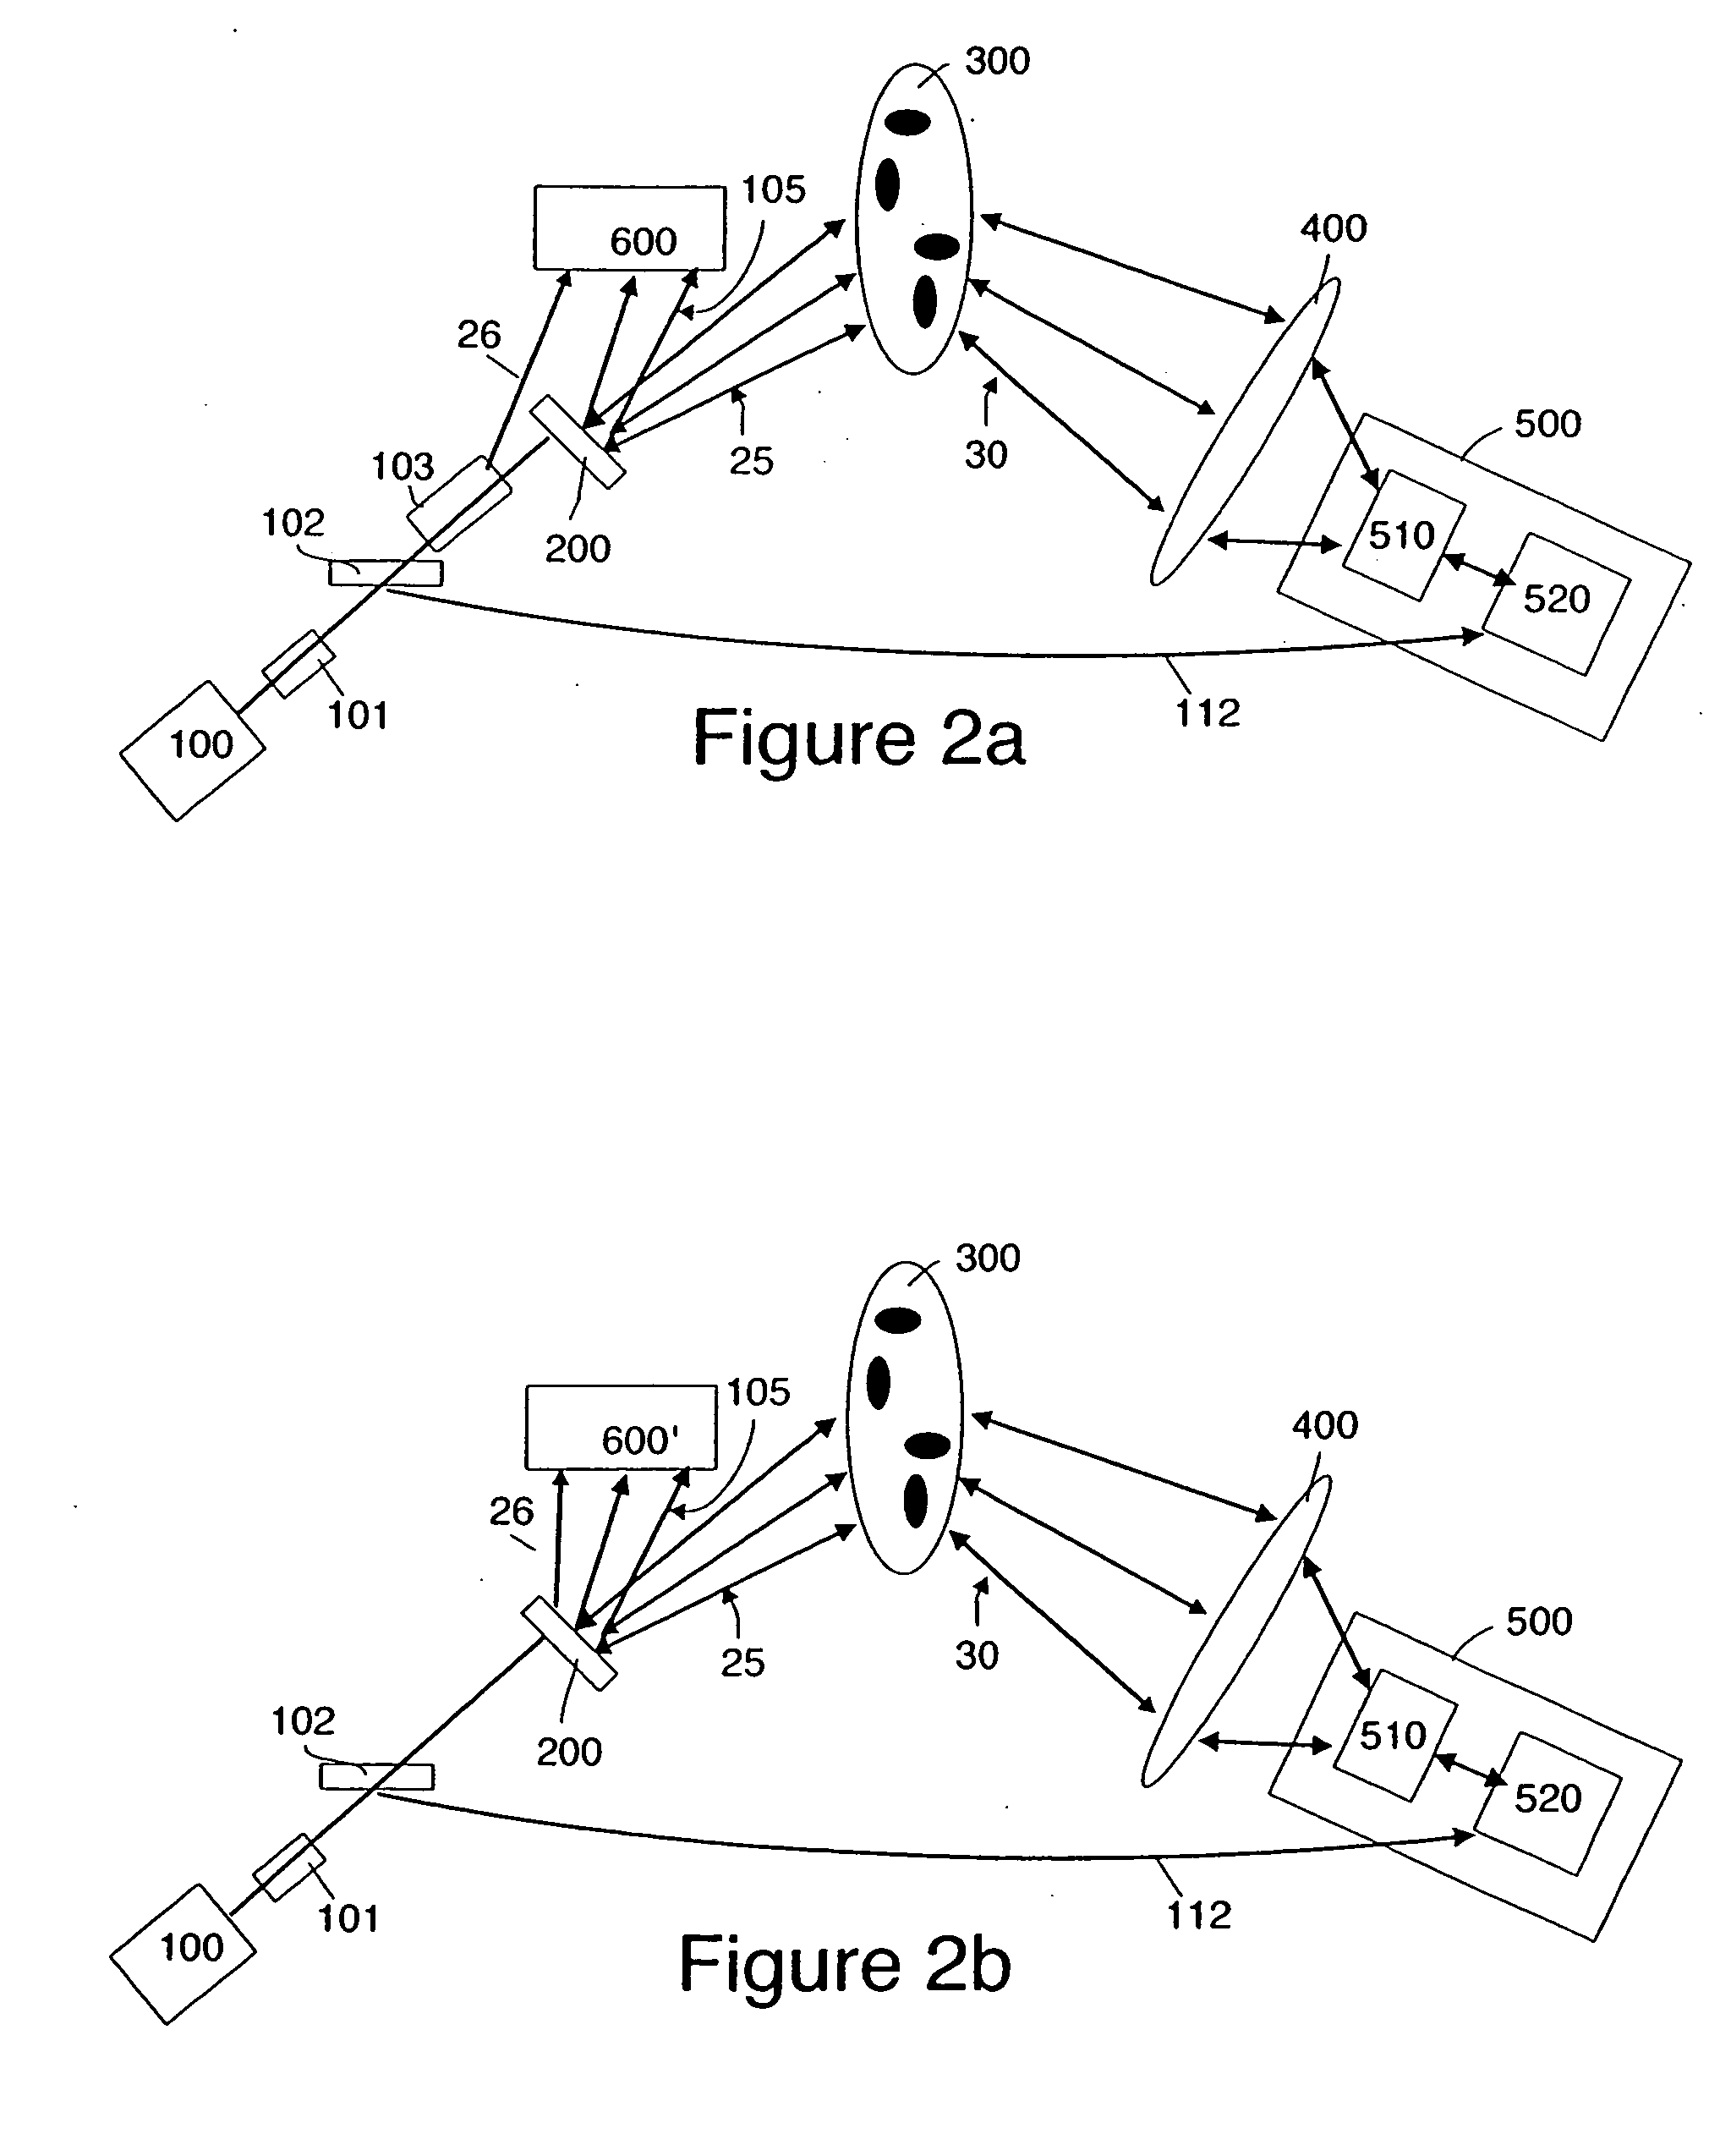 Optical remote sensor with differential Doppler motion compensation